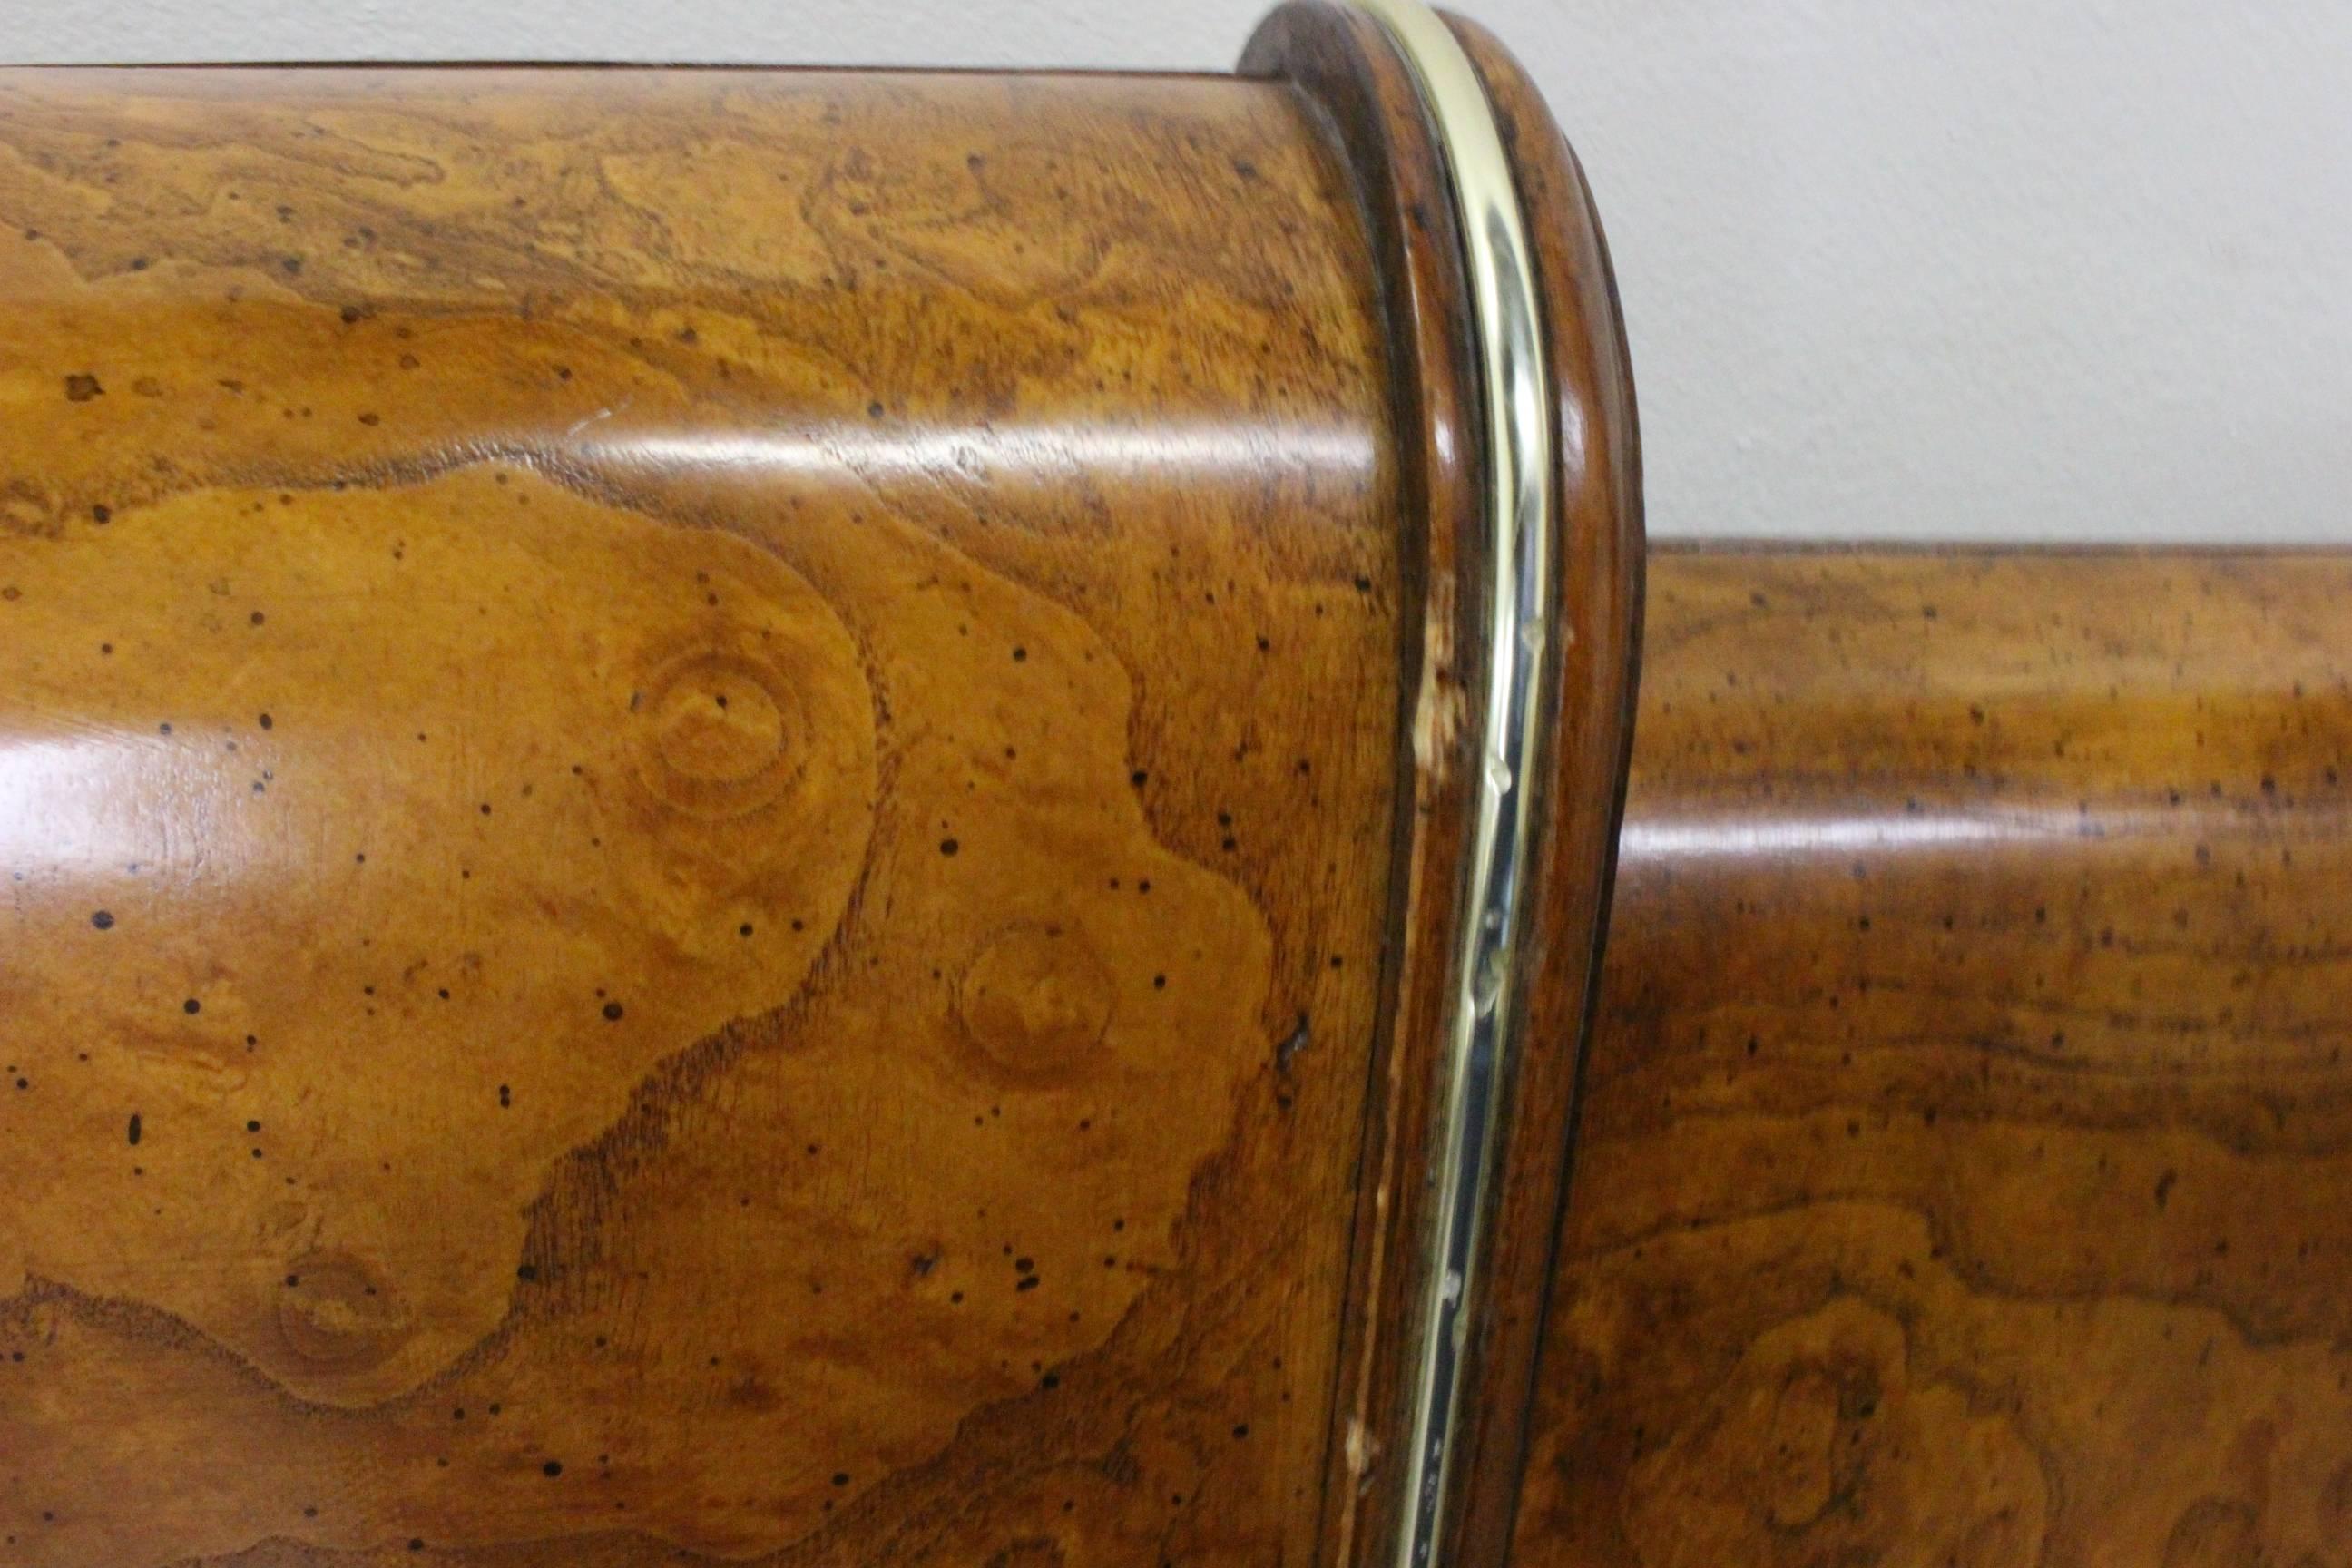 Burl wood deco headboard which is in good condition, with some slight damage to brass lining detail. 

dimensions: 78.5